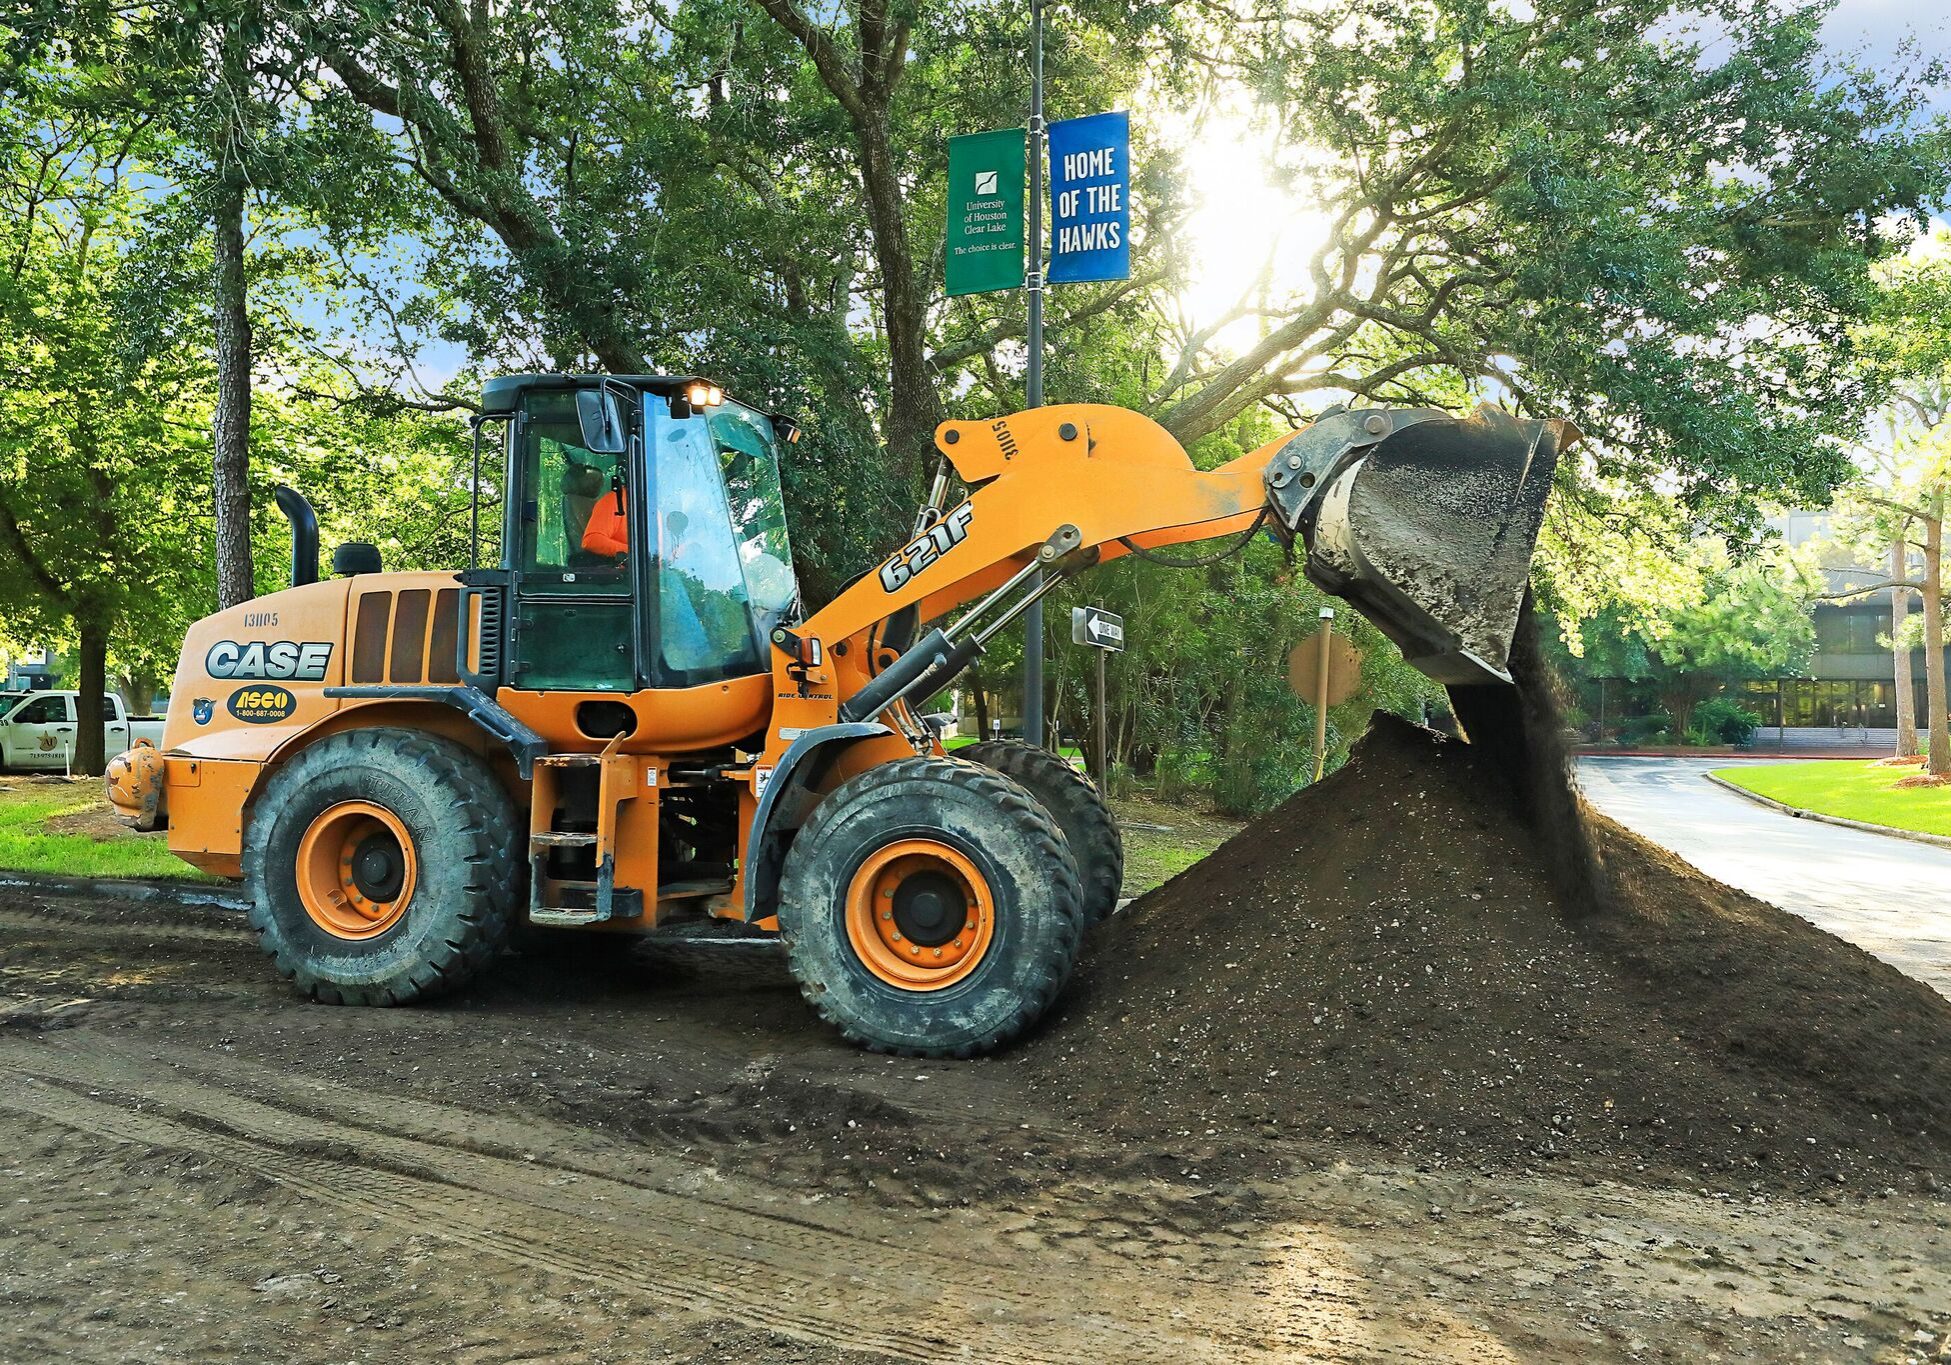 A-1 Construction Services provided professional guidance to determine the most economical solution to replacing roadways throughout the university